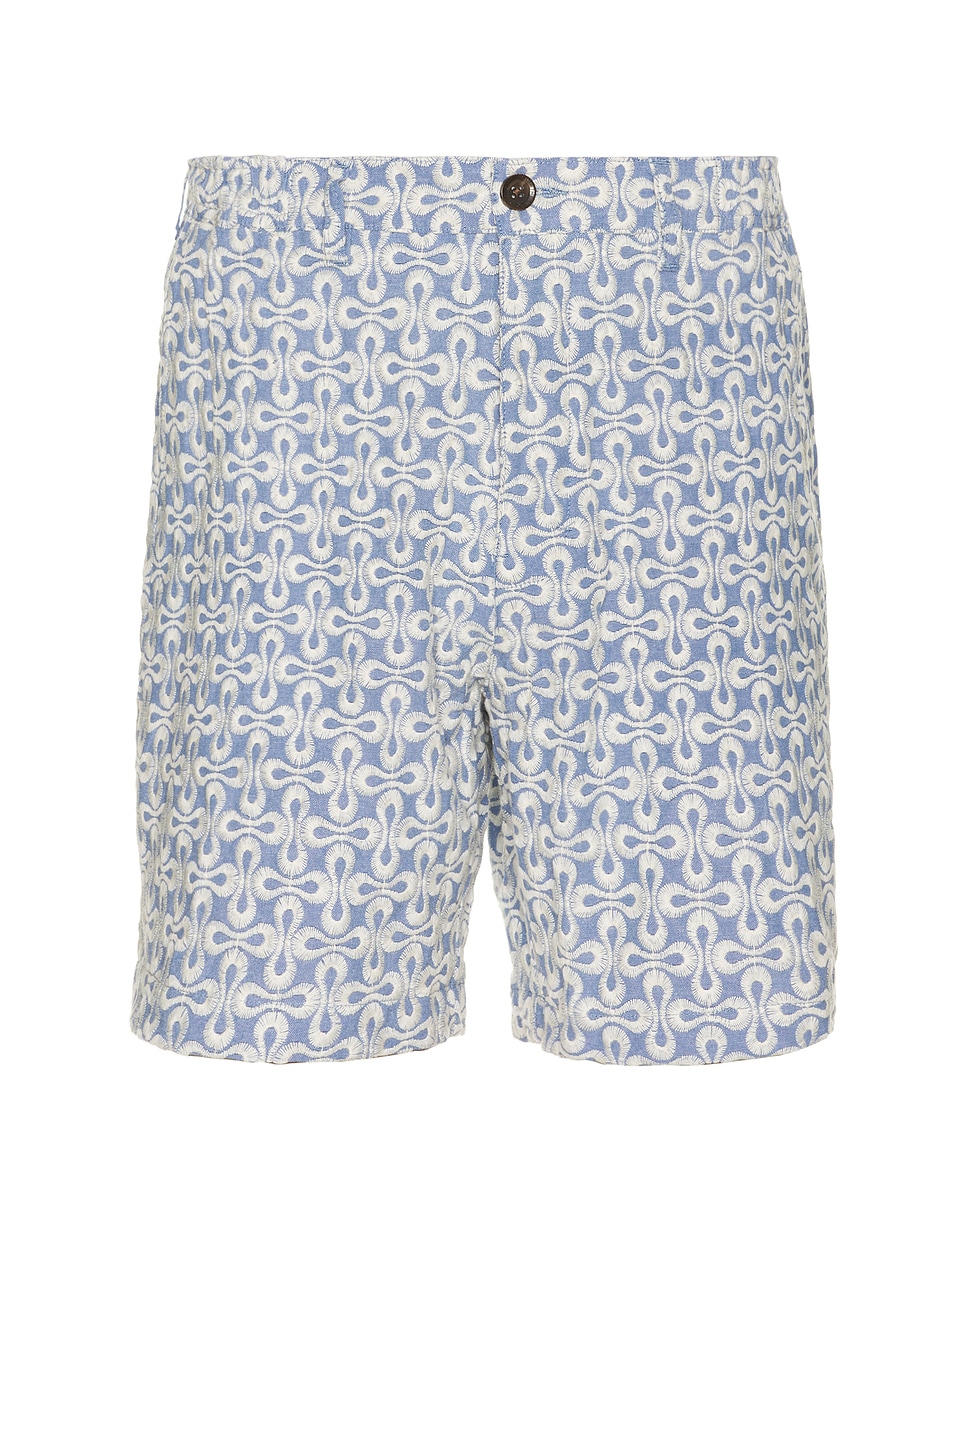 Image 1 of Honor The Gift Infinity Short in Blue